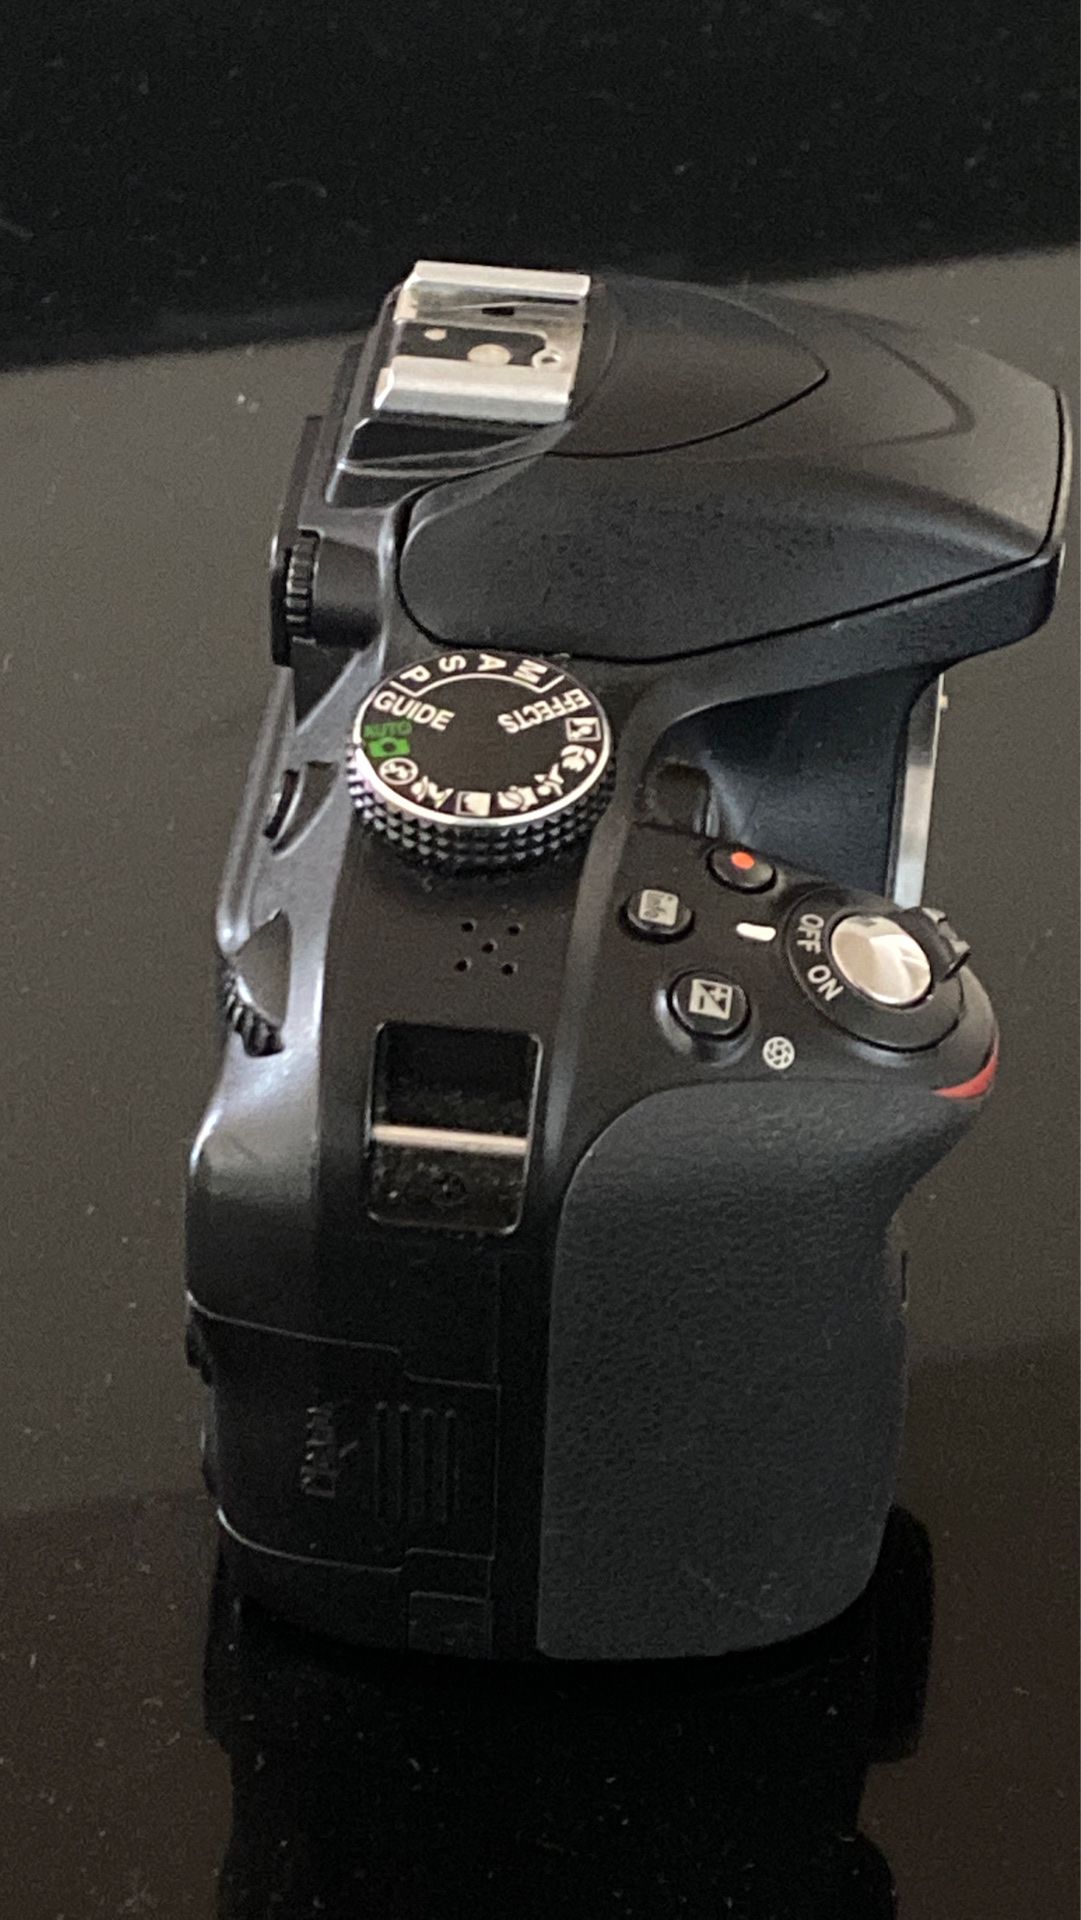 Nikon d3300 (w/ battery and battery charger)